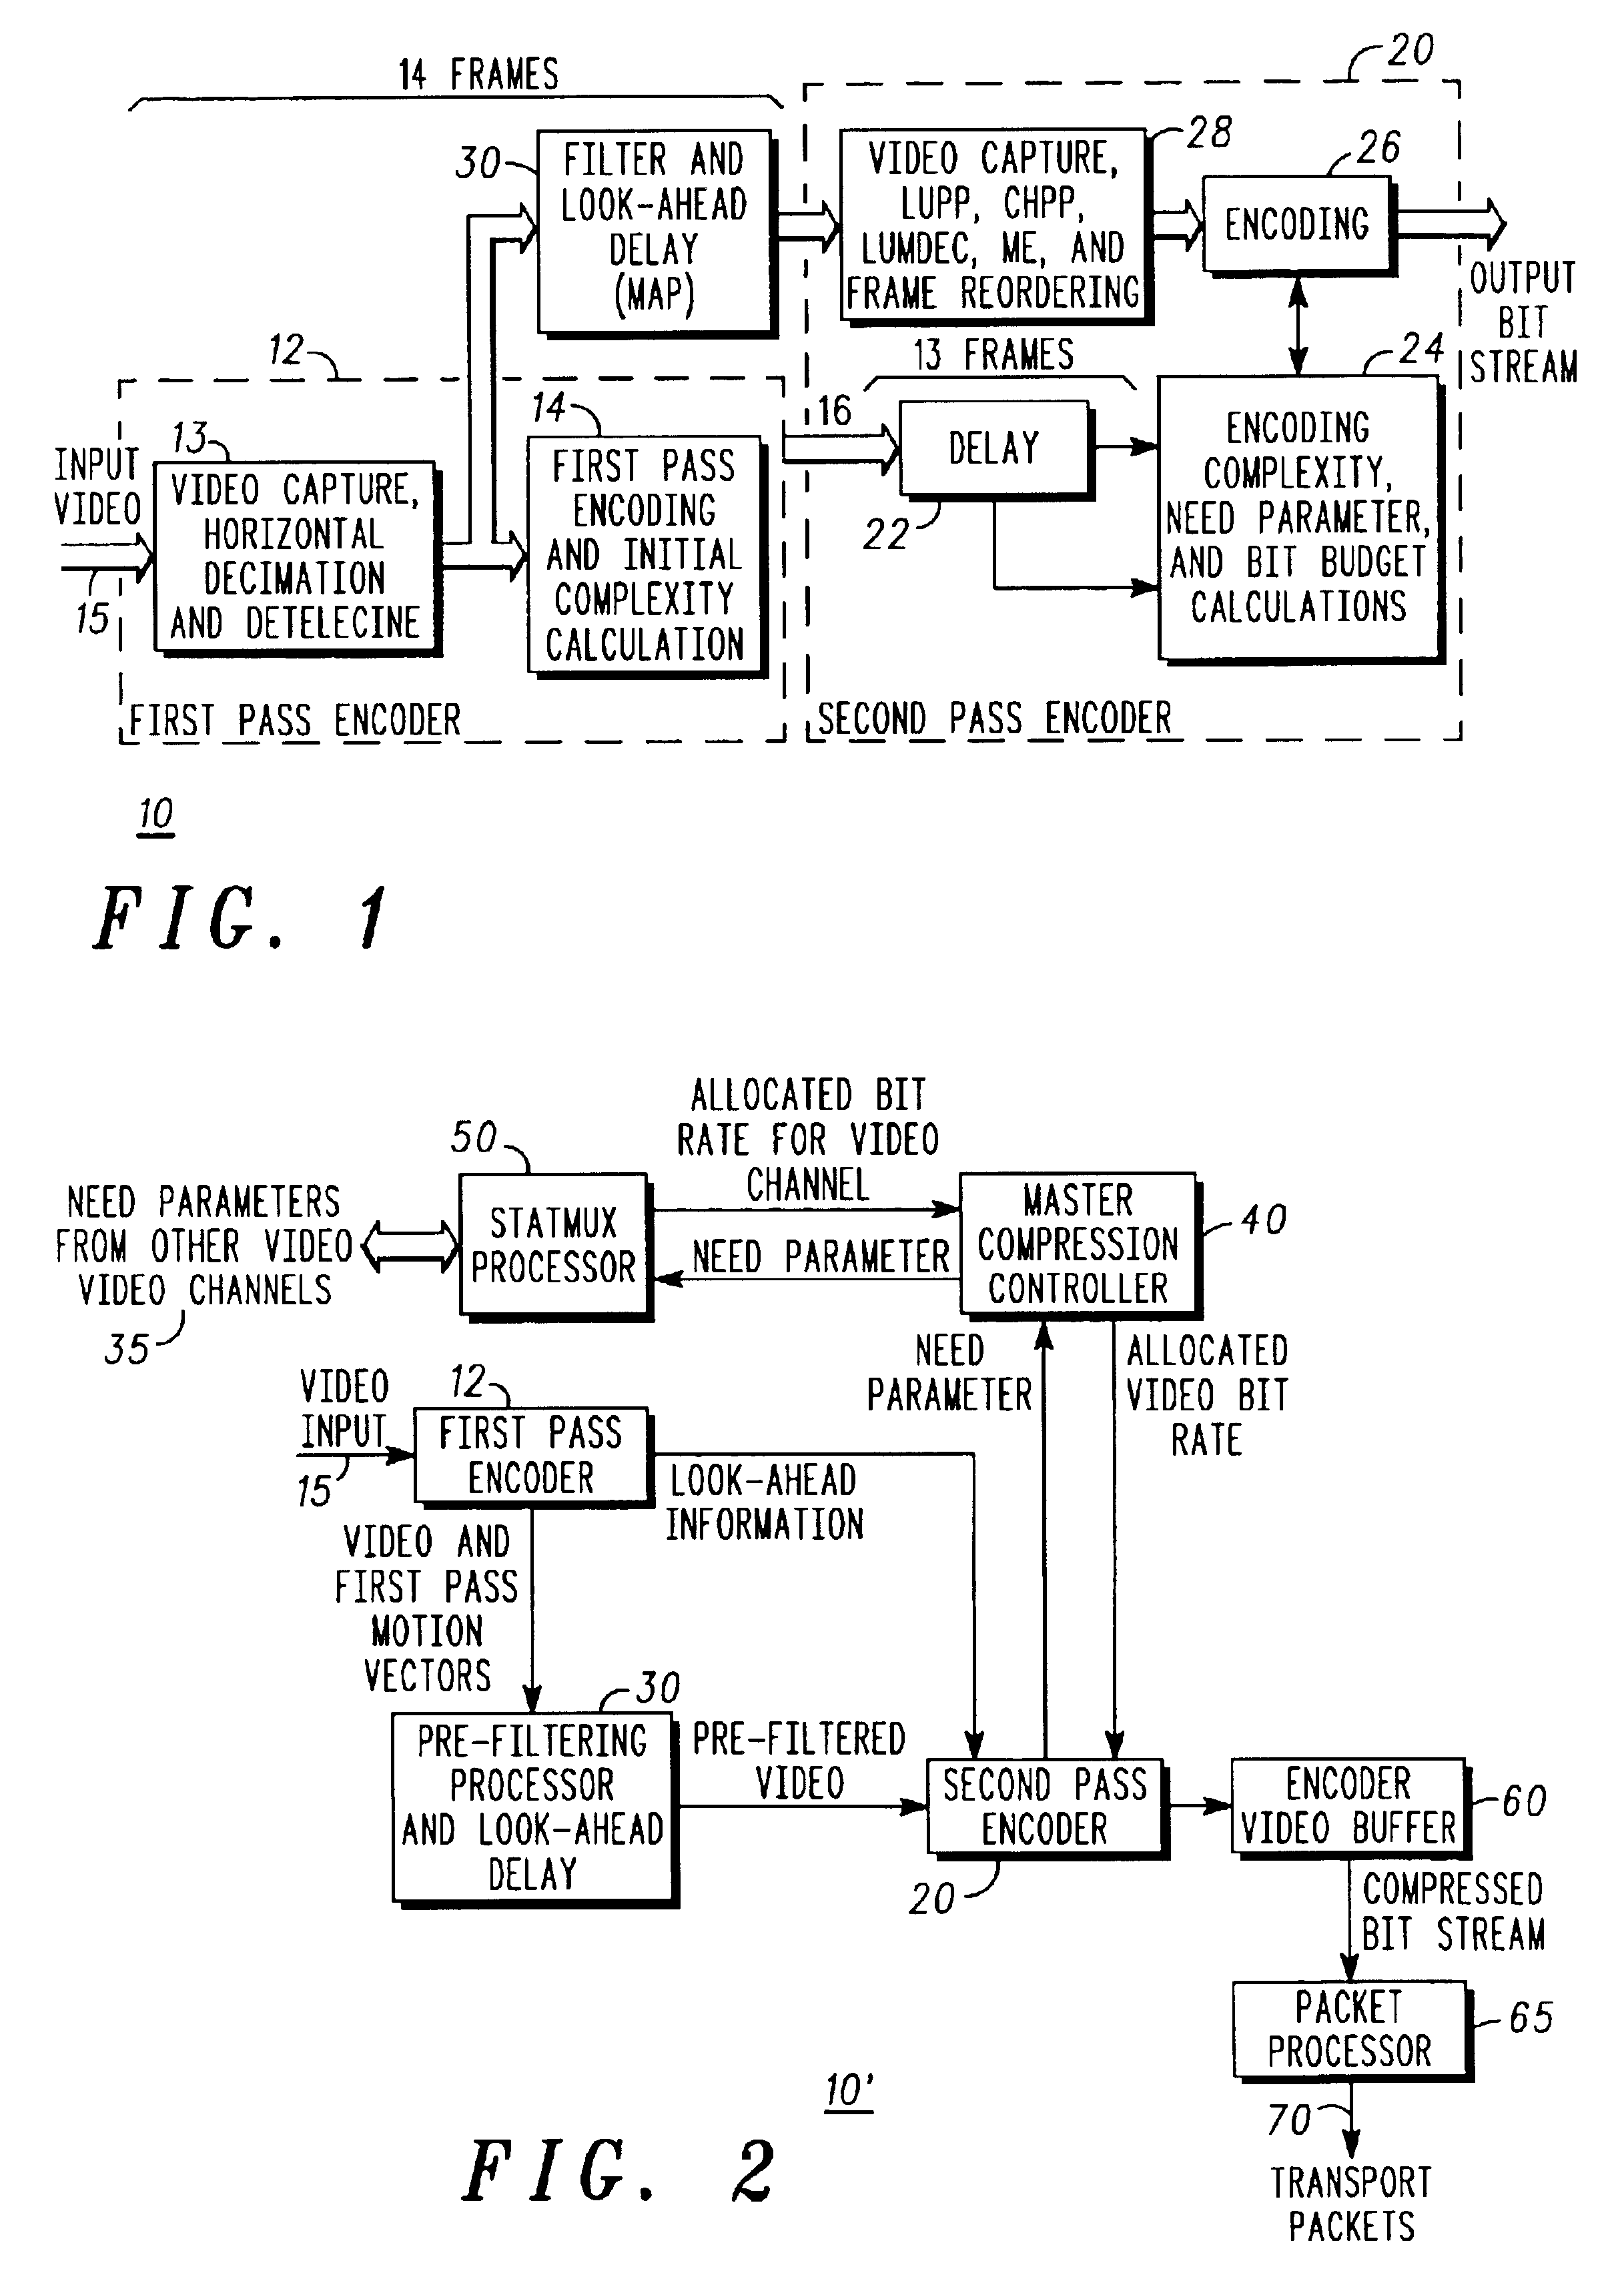 Methods and apparatus for rate control during dual pass encoding